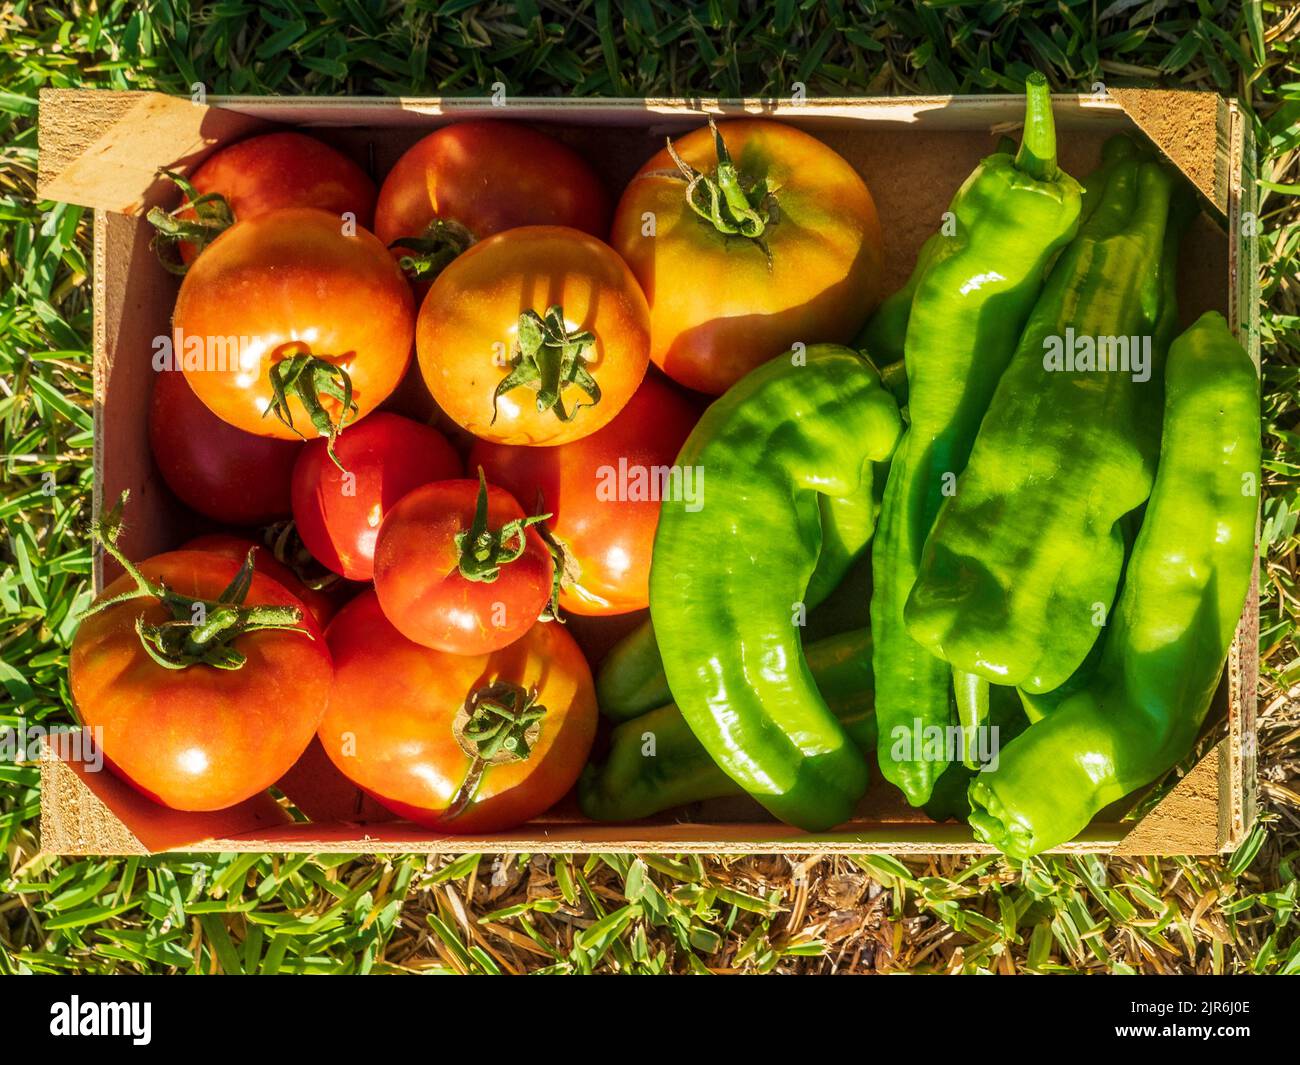 Wooden box with organic tomatoes and peppers Stock Photo